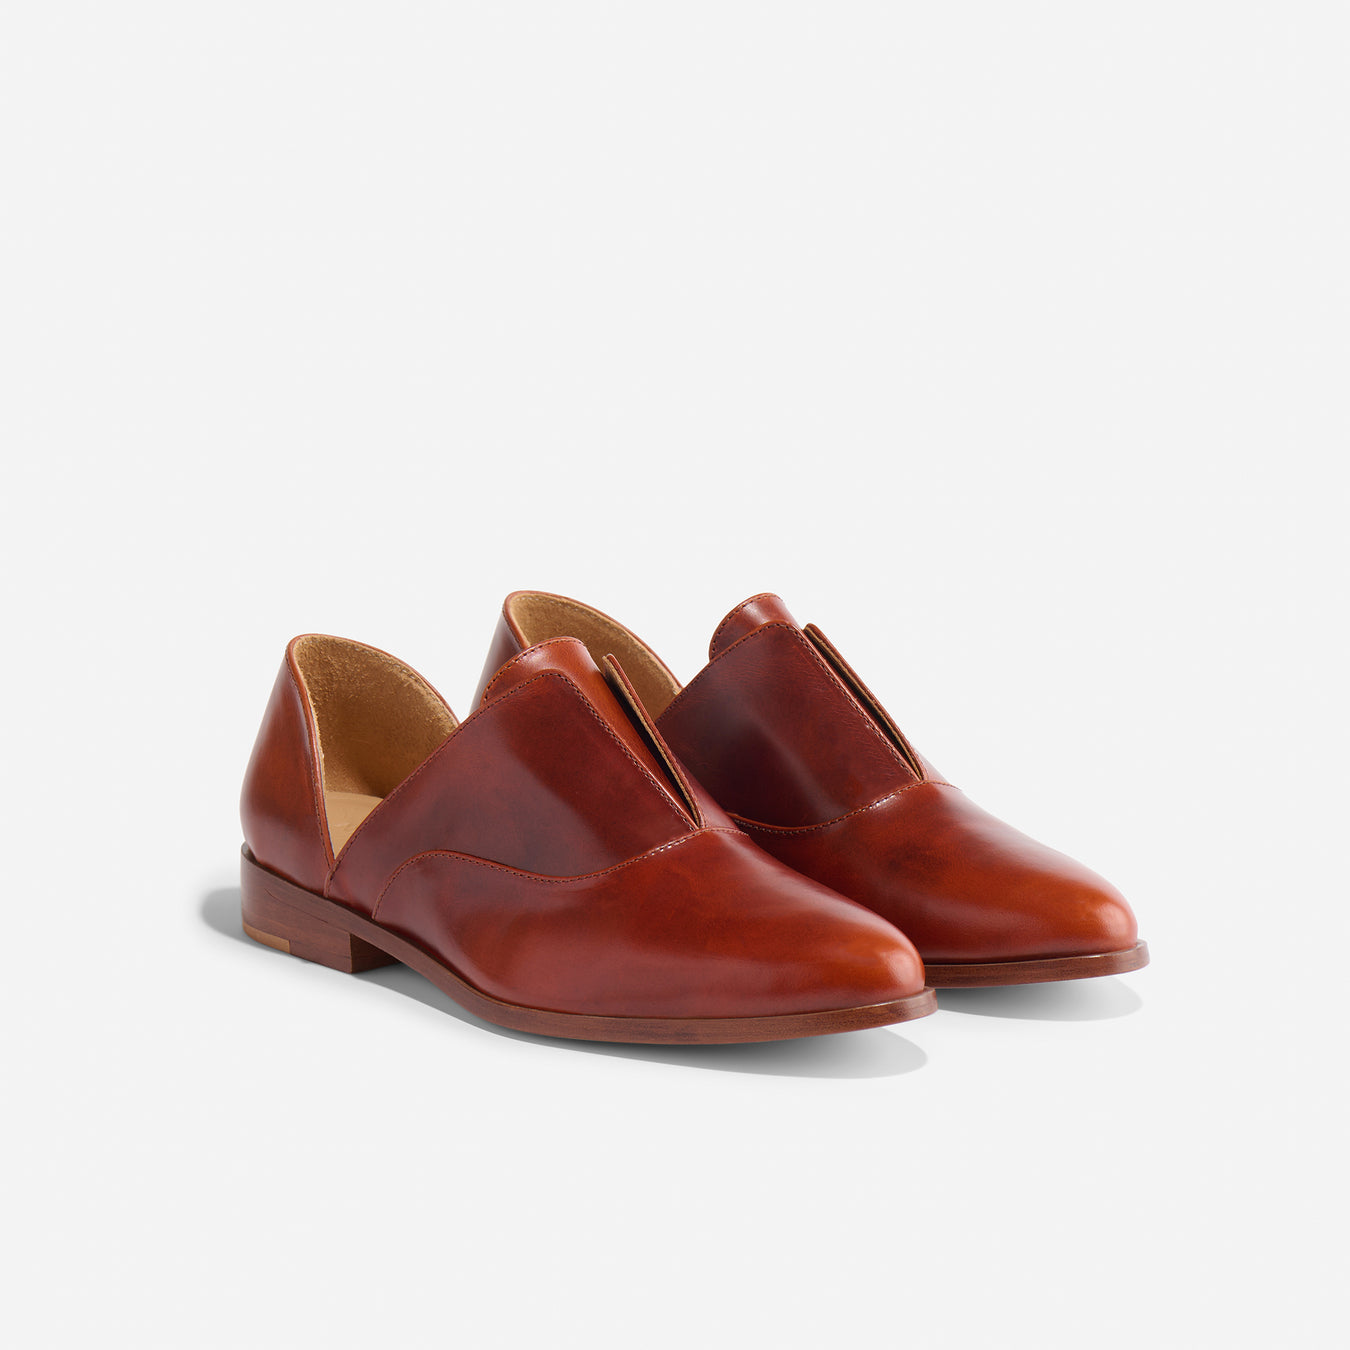 Women's Loafers and Mules